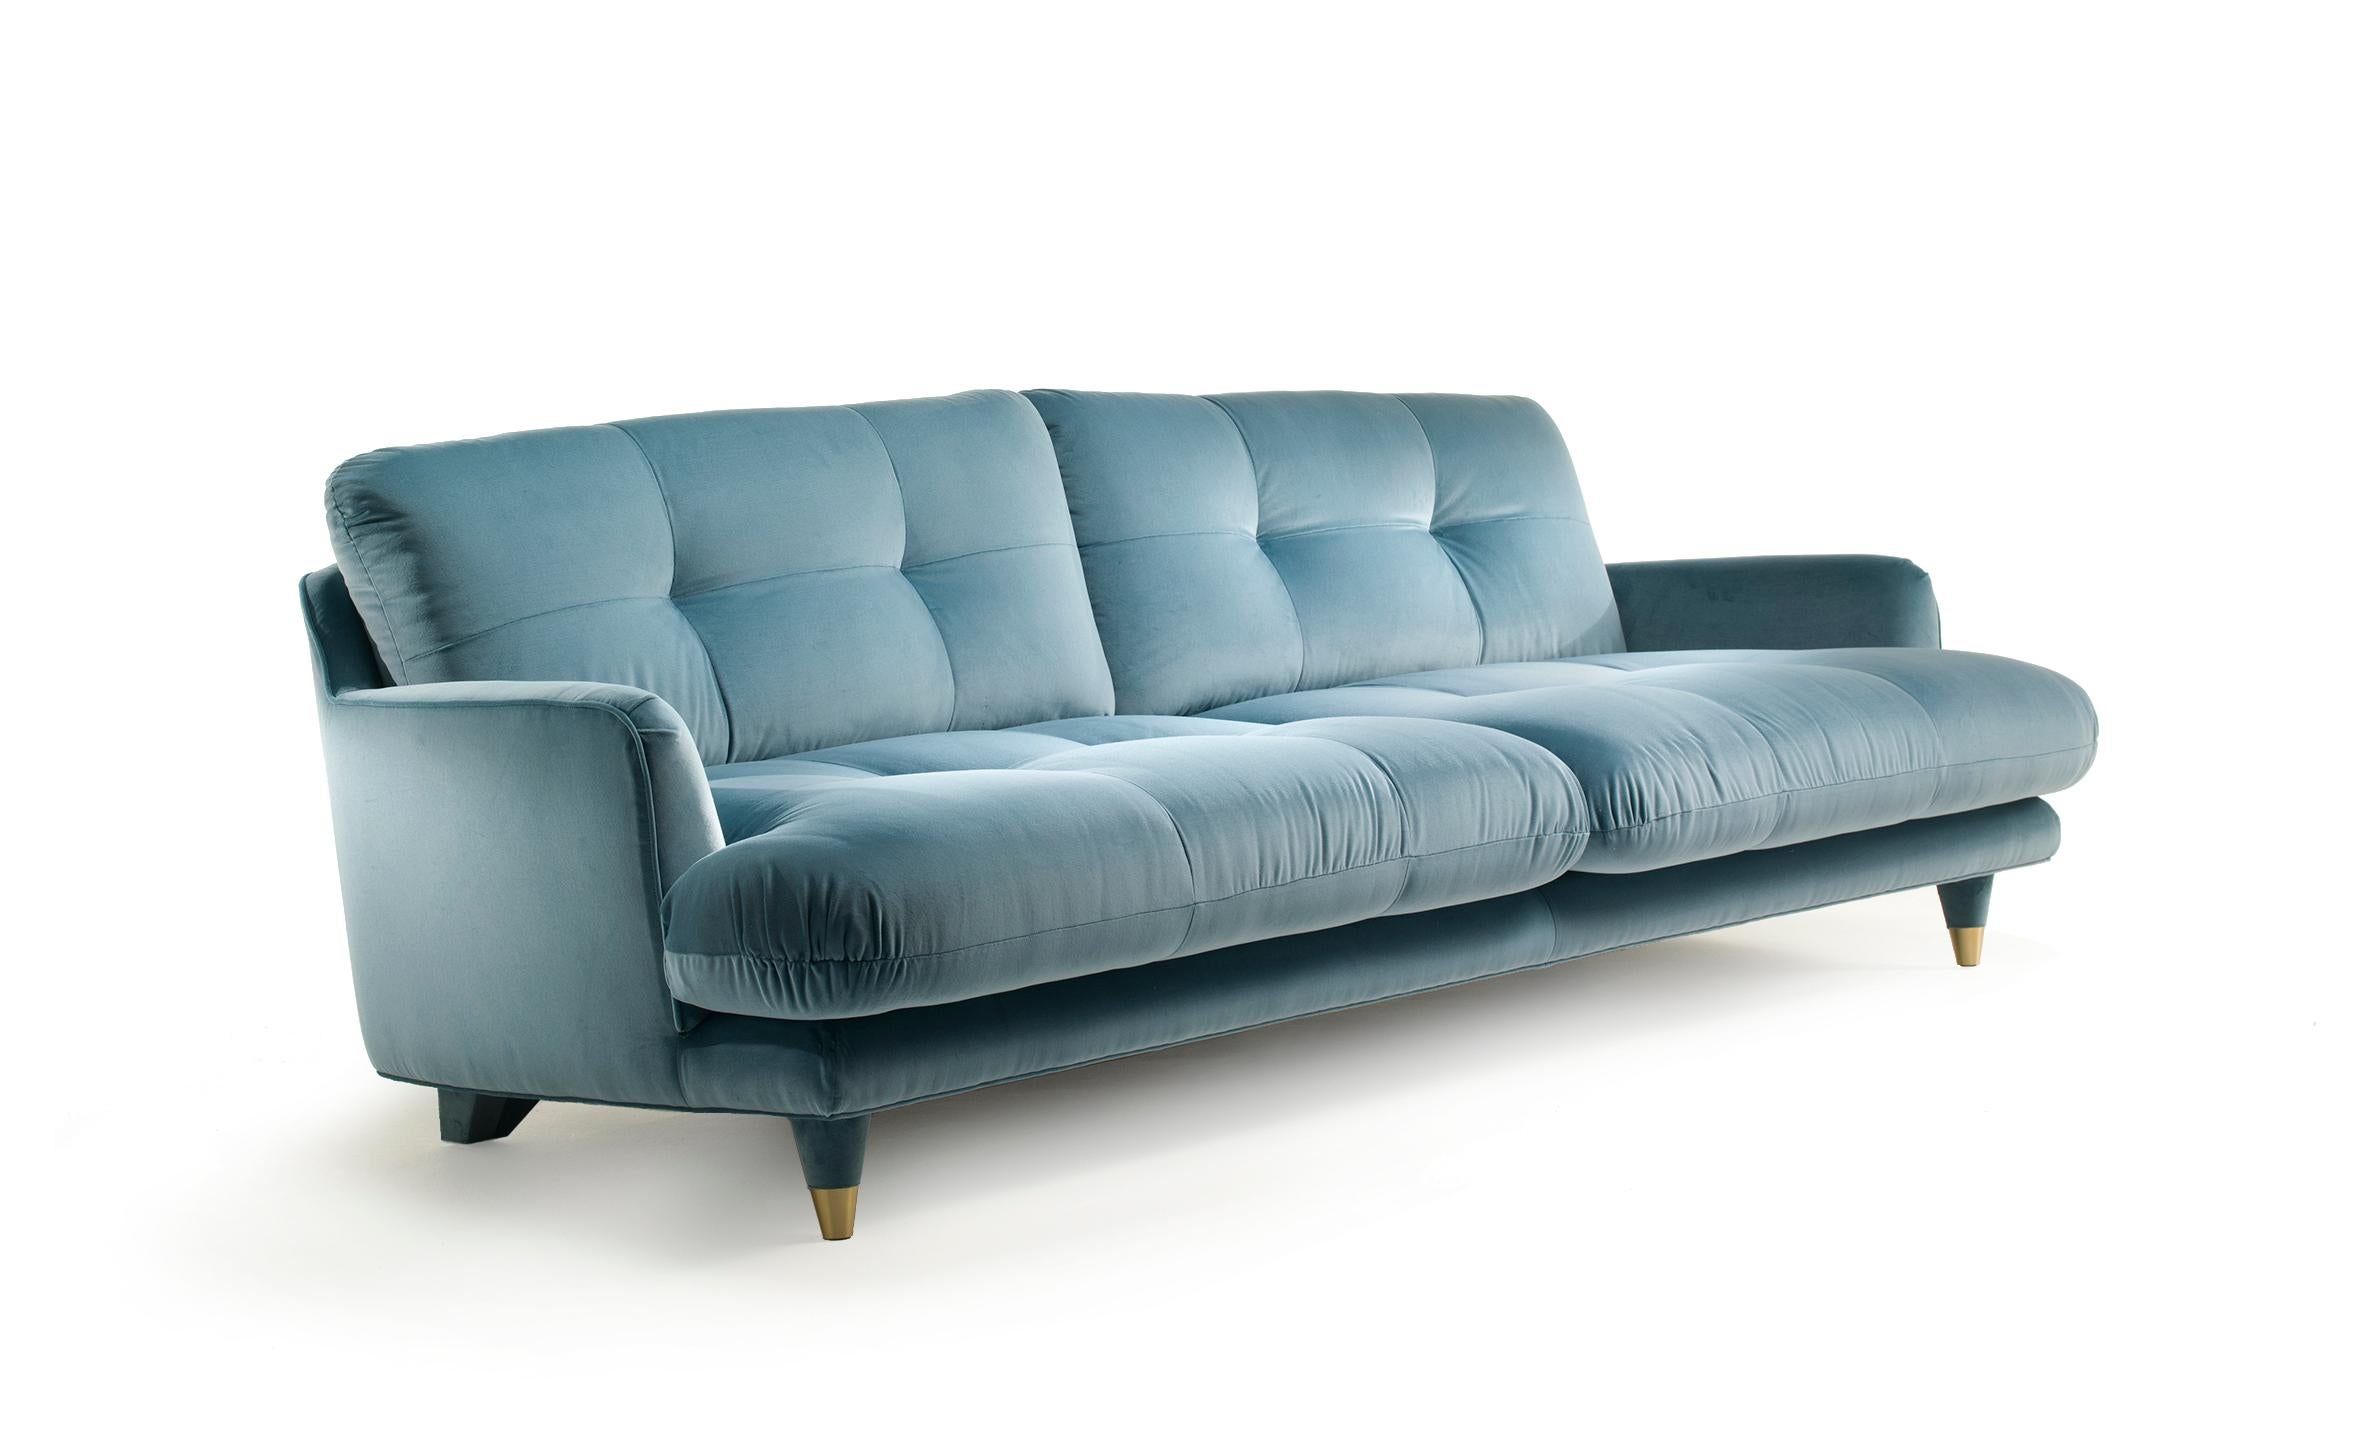 Step into the timeless elegance of the Century collection, a masterpiece by Dainelli Studio that seamlessly blends English '50s aesthetics with a modern decorative flair. Our curated selection includes the magnificent Century sofa—an object of